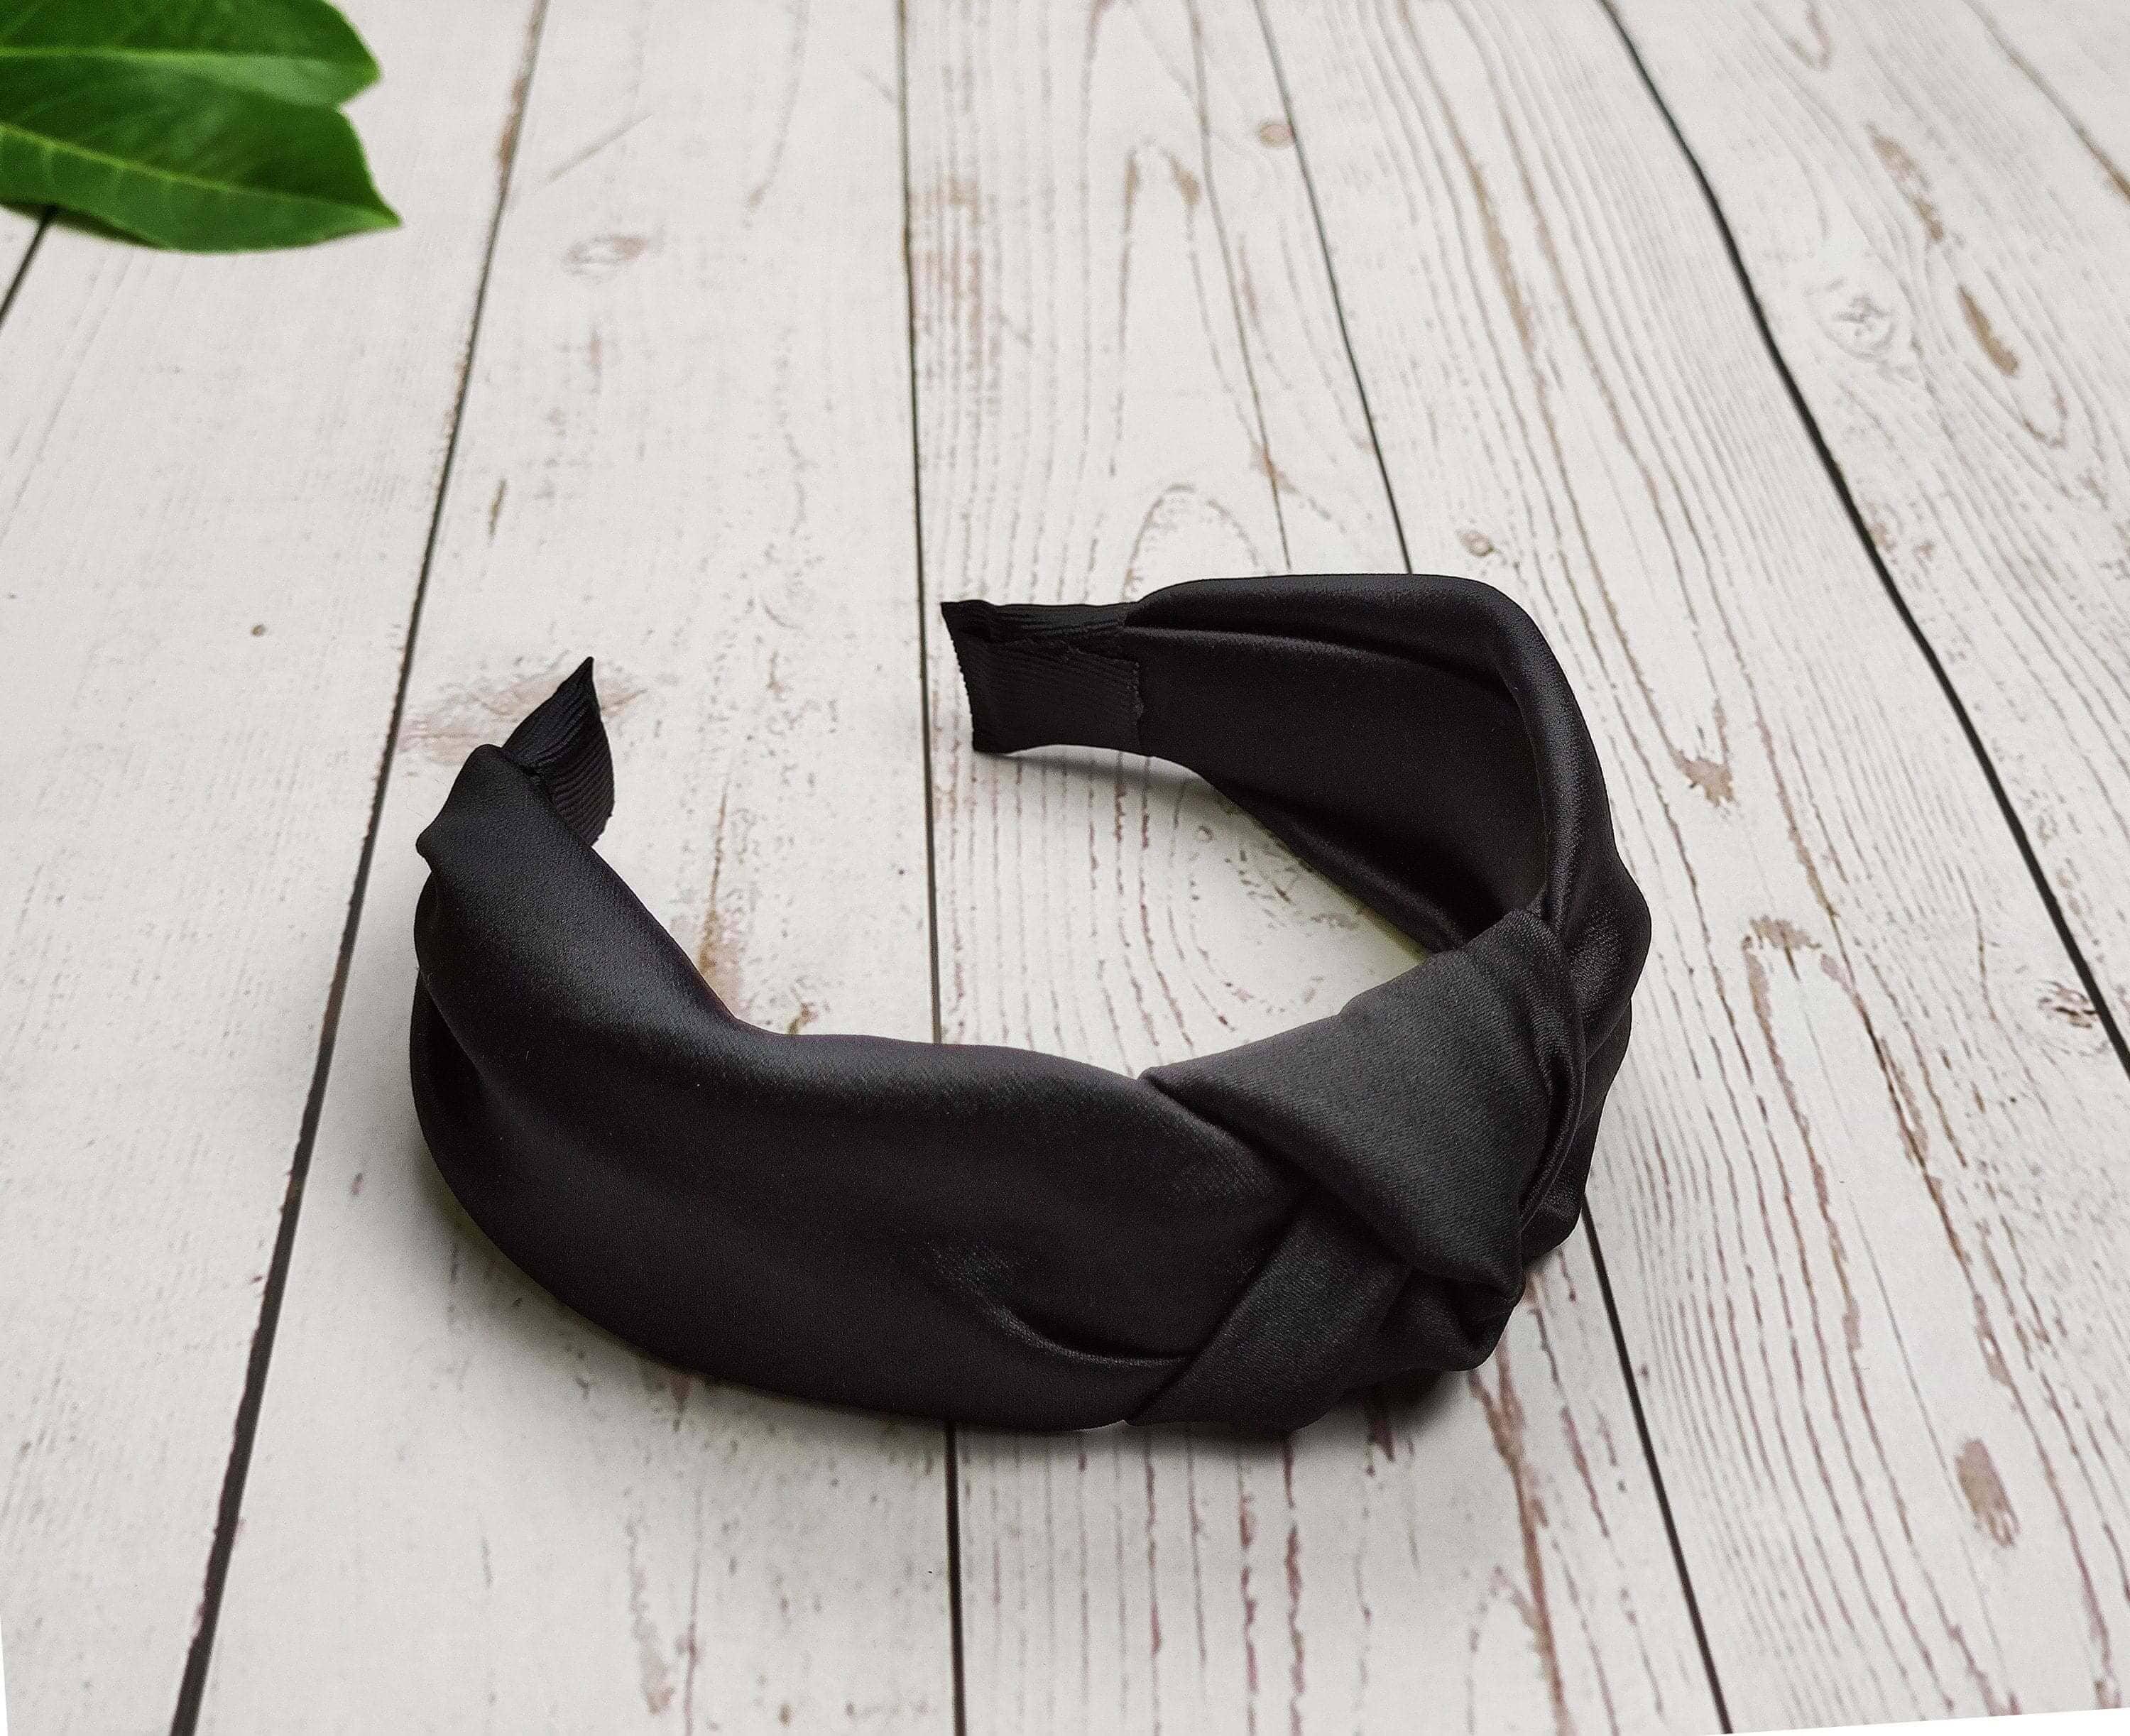 Exquisite Black Satin Knotted Headband for Women - A Chic and Stylish Hair Accessory without padded available at Moyoni Design